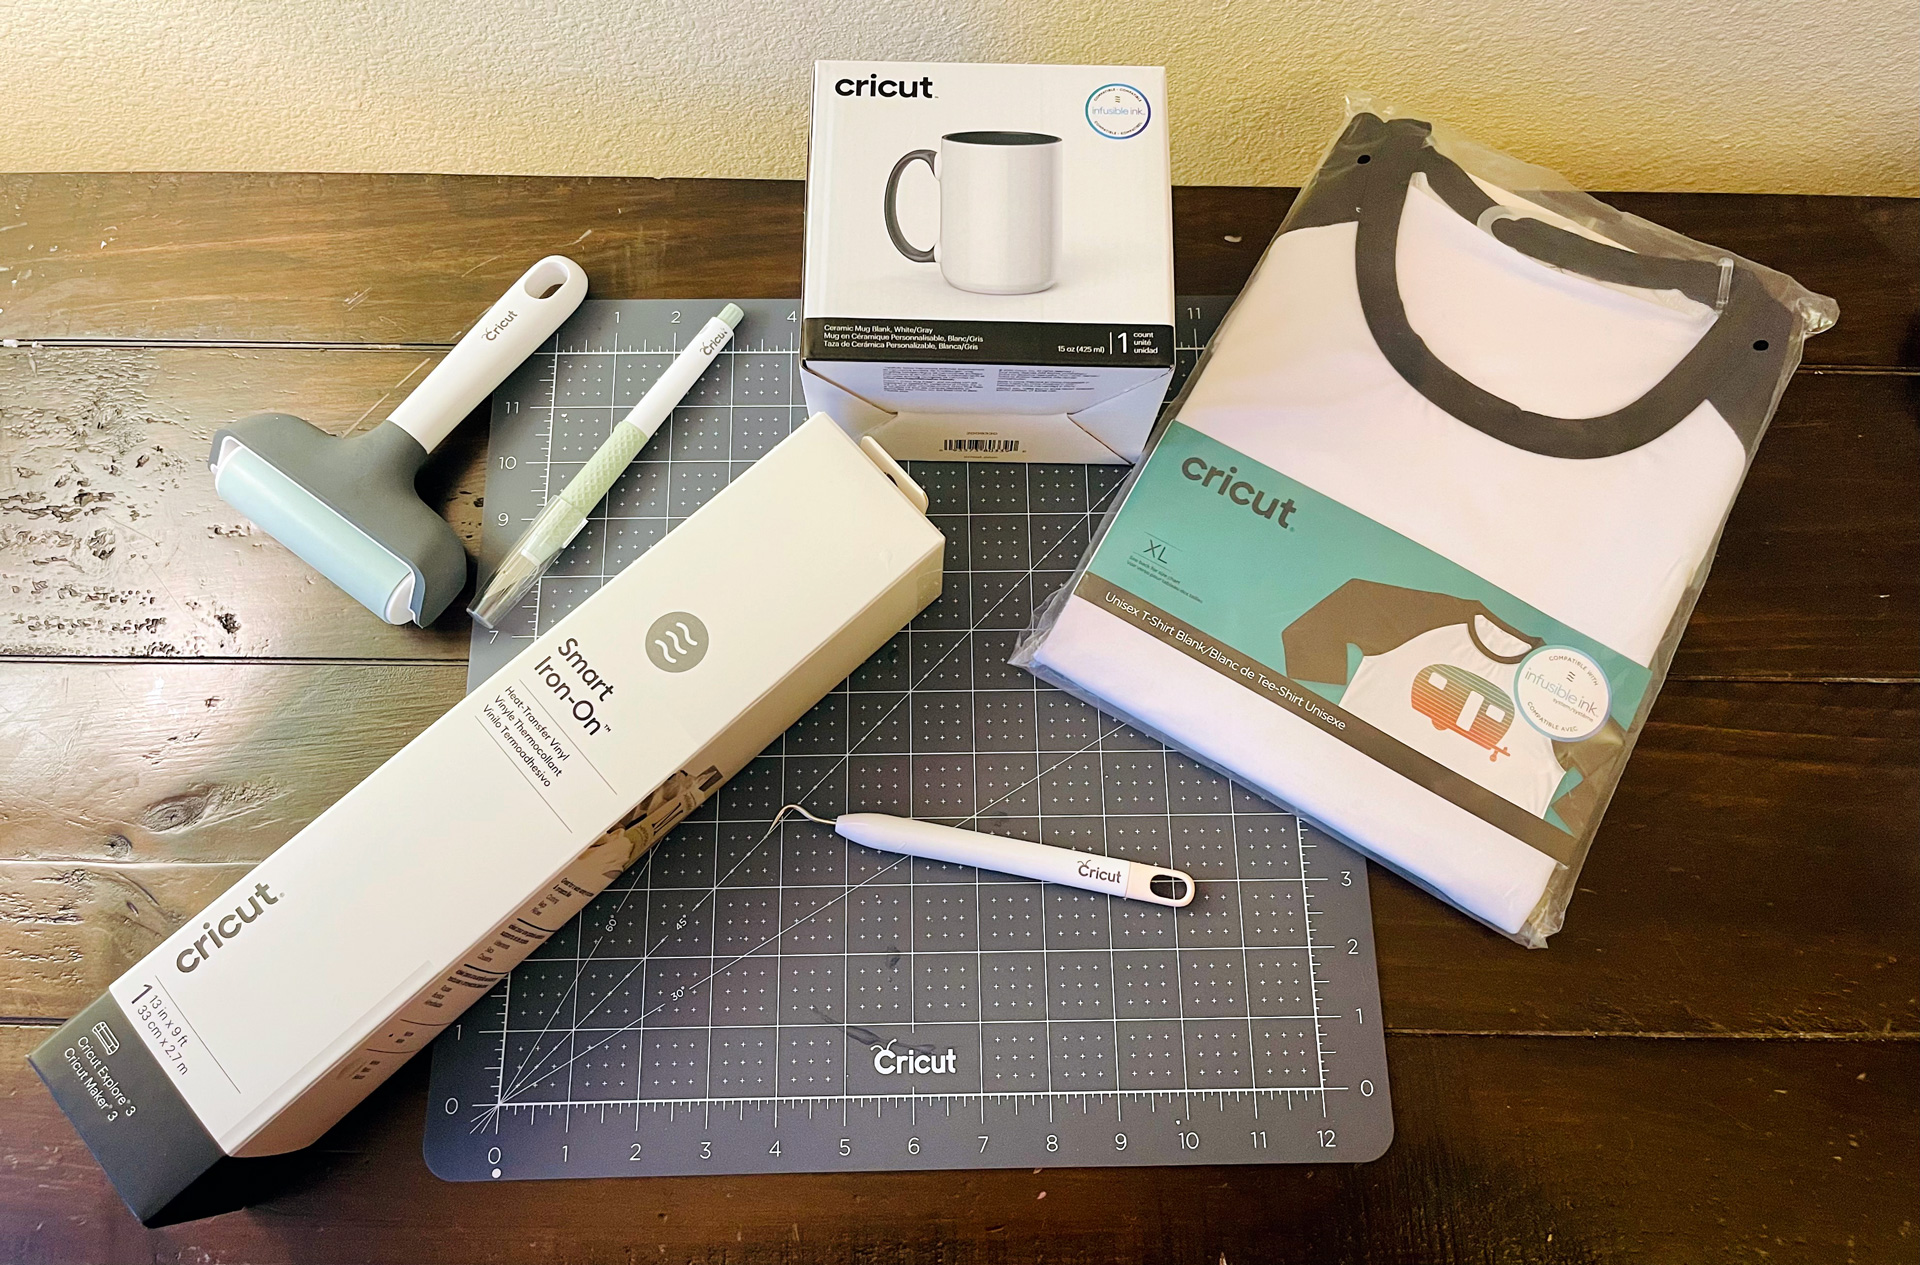 The Ultimate Guide to the Tools, Accessories, and Supplies Every Cricut  User Needs — Creative Cutting Classroom